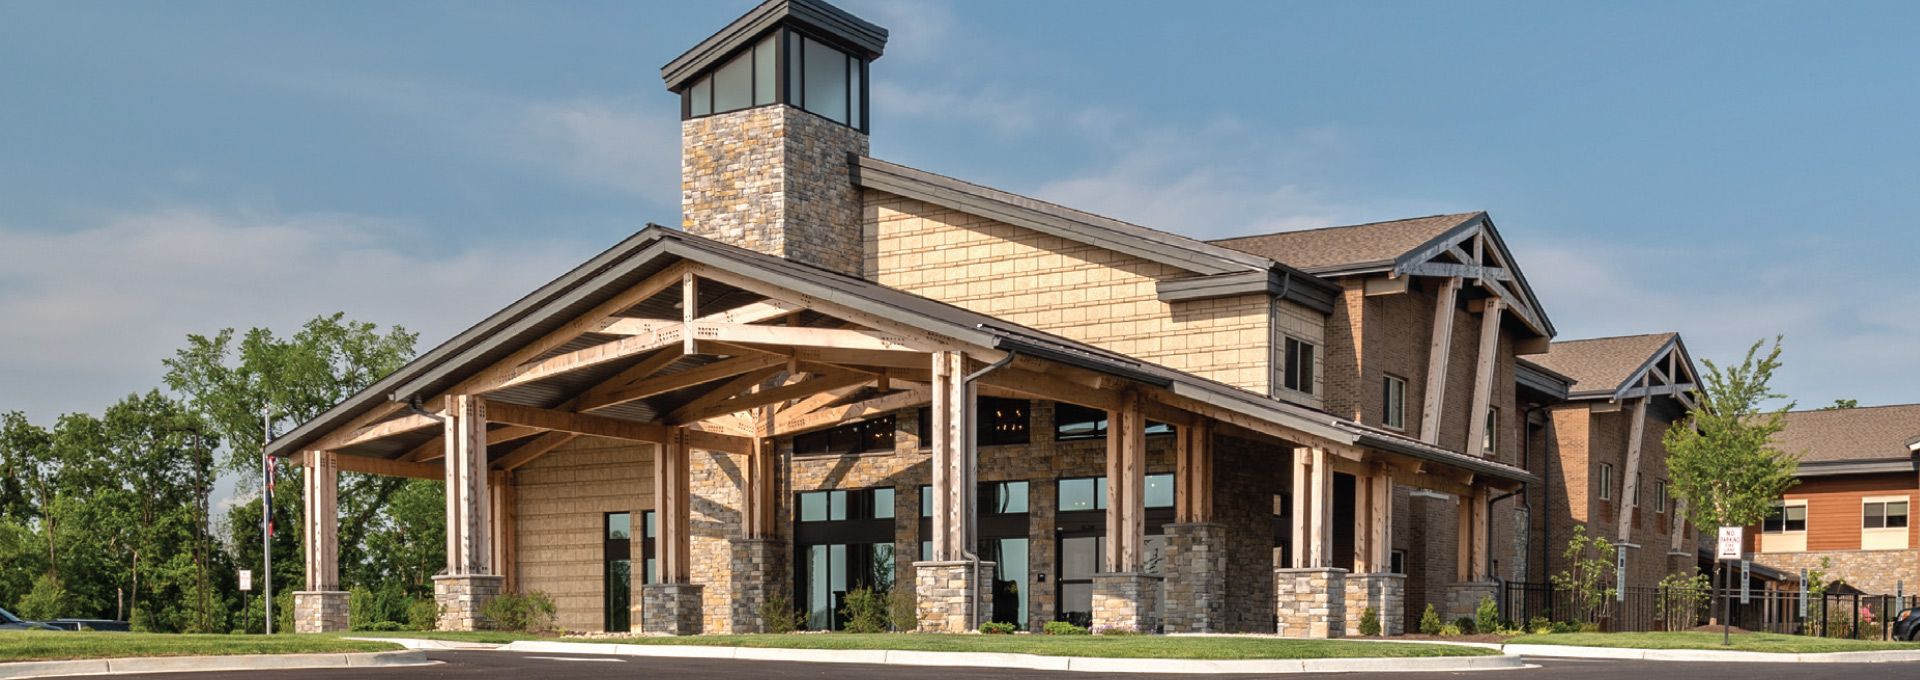 Boonespring Transitional Care Center 1